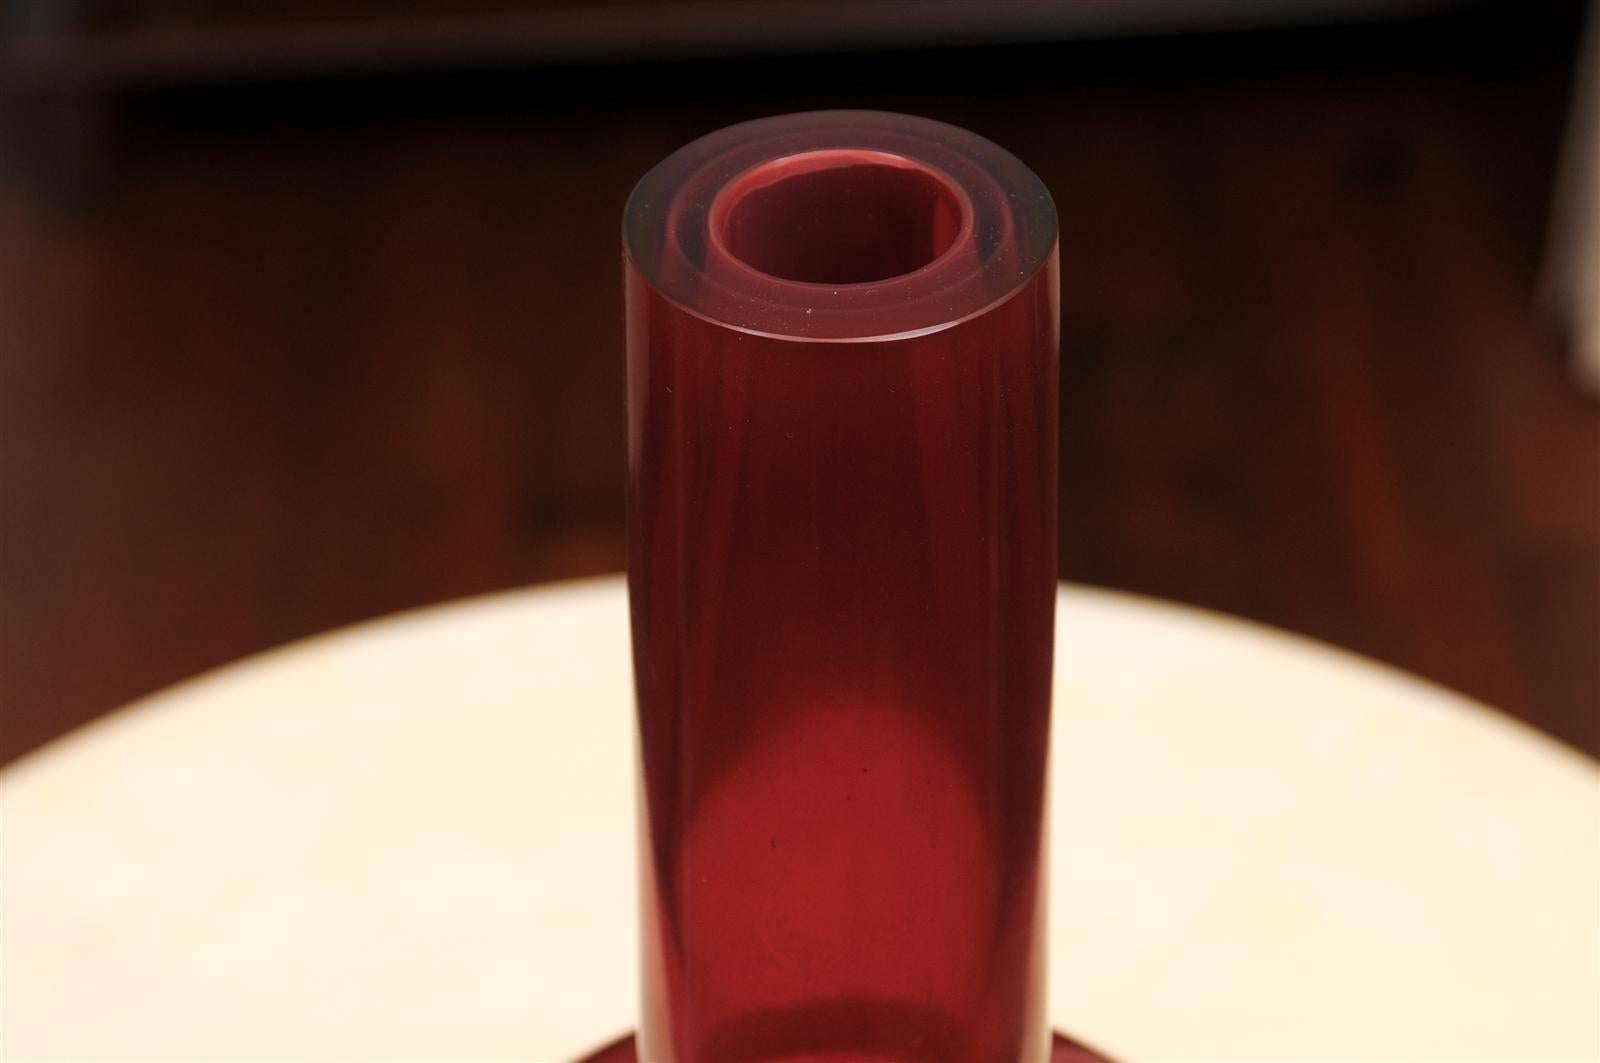 Peking Gourd Vase, Translucent Red by Robert Kuo 2